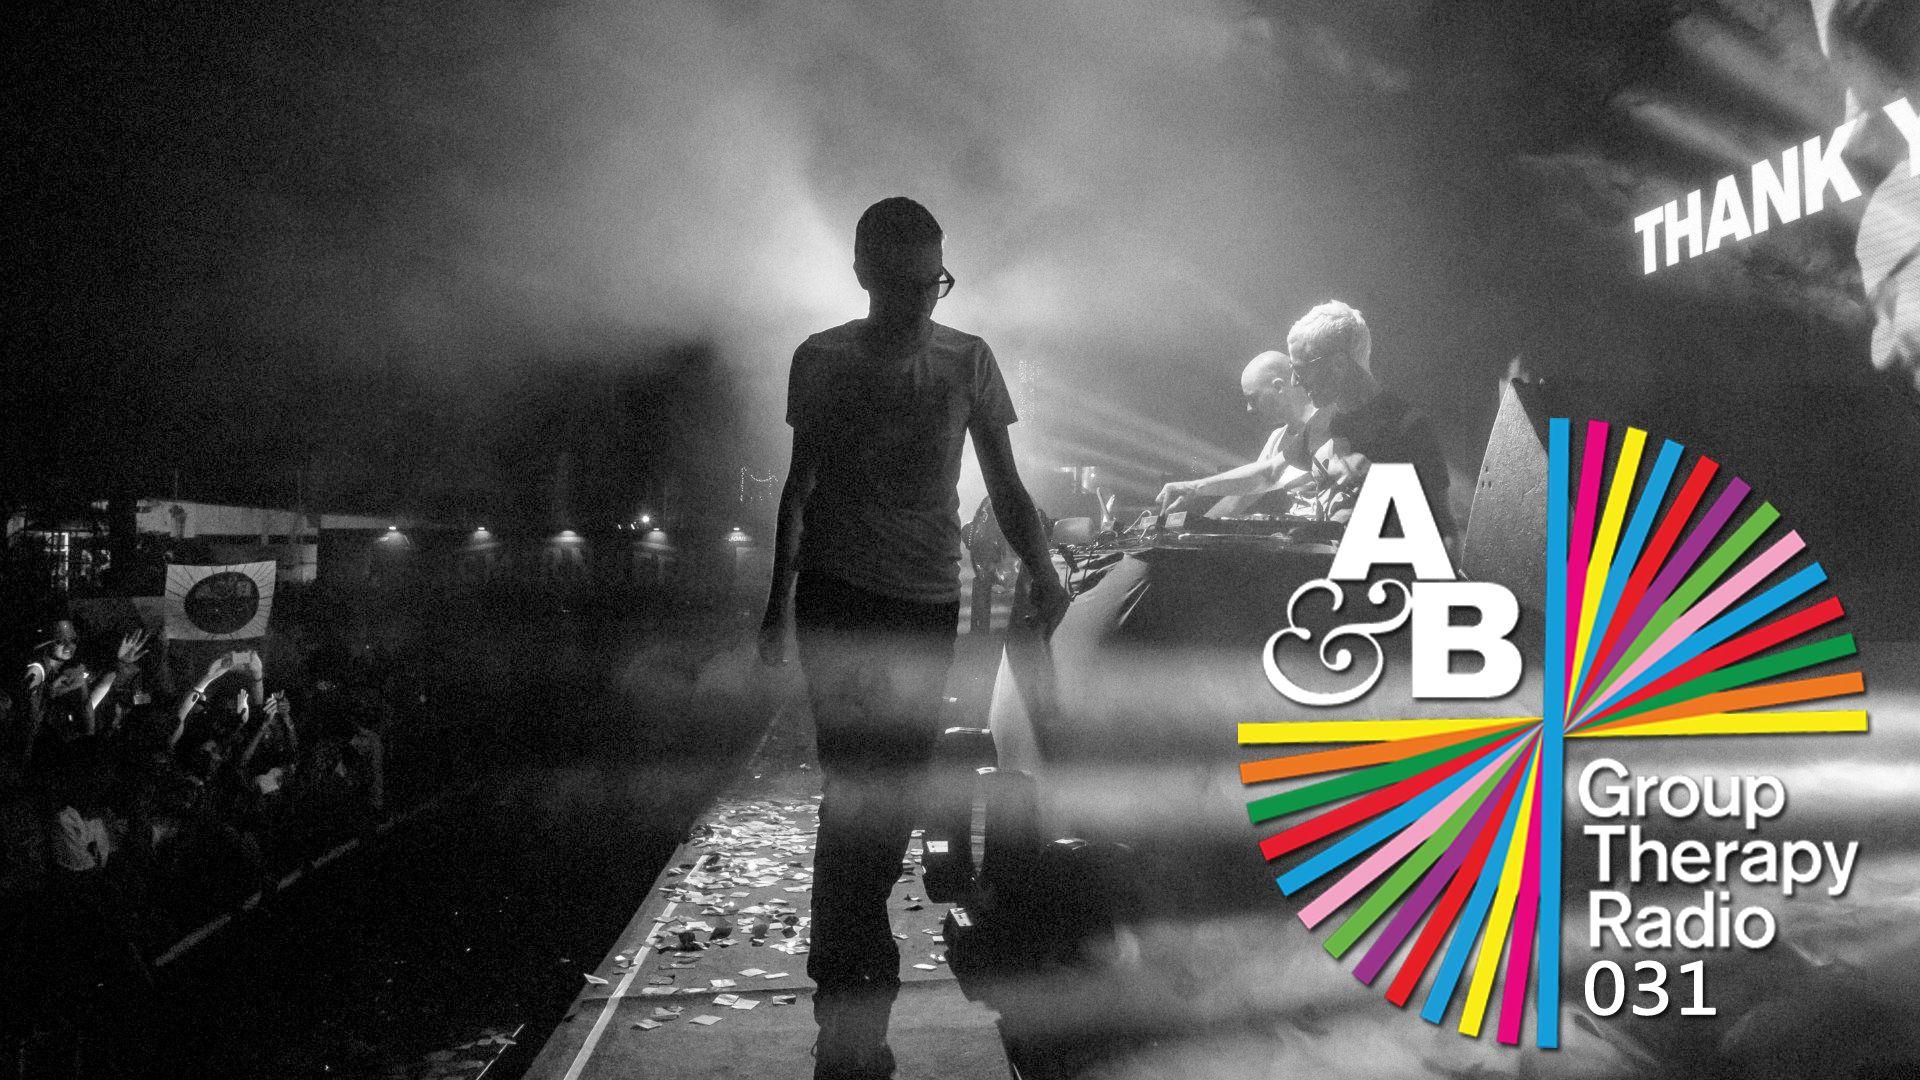 Group Therapy 031 (07.06.2013) with Above & Beyond and John O'Bir